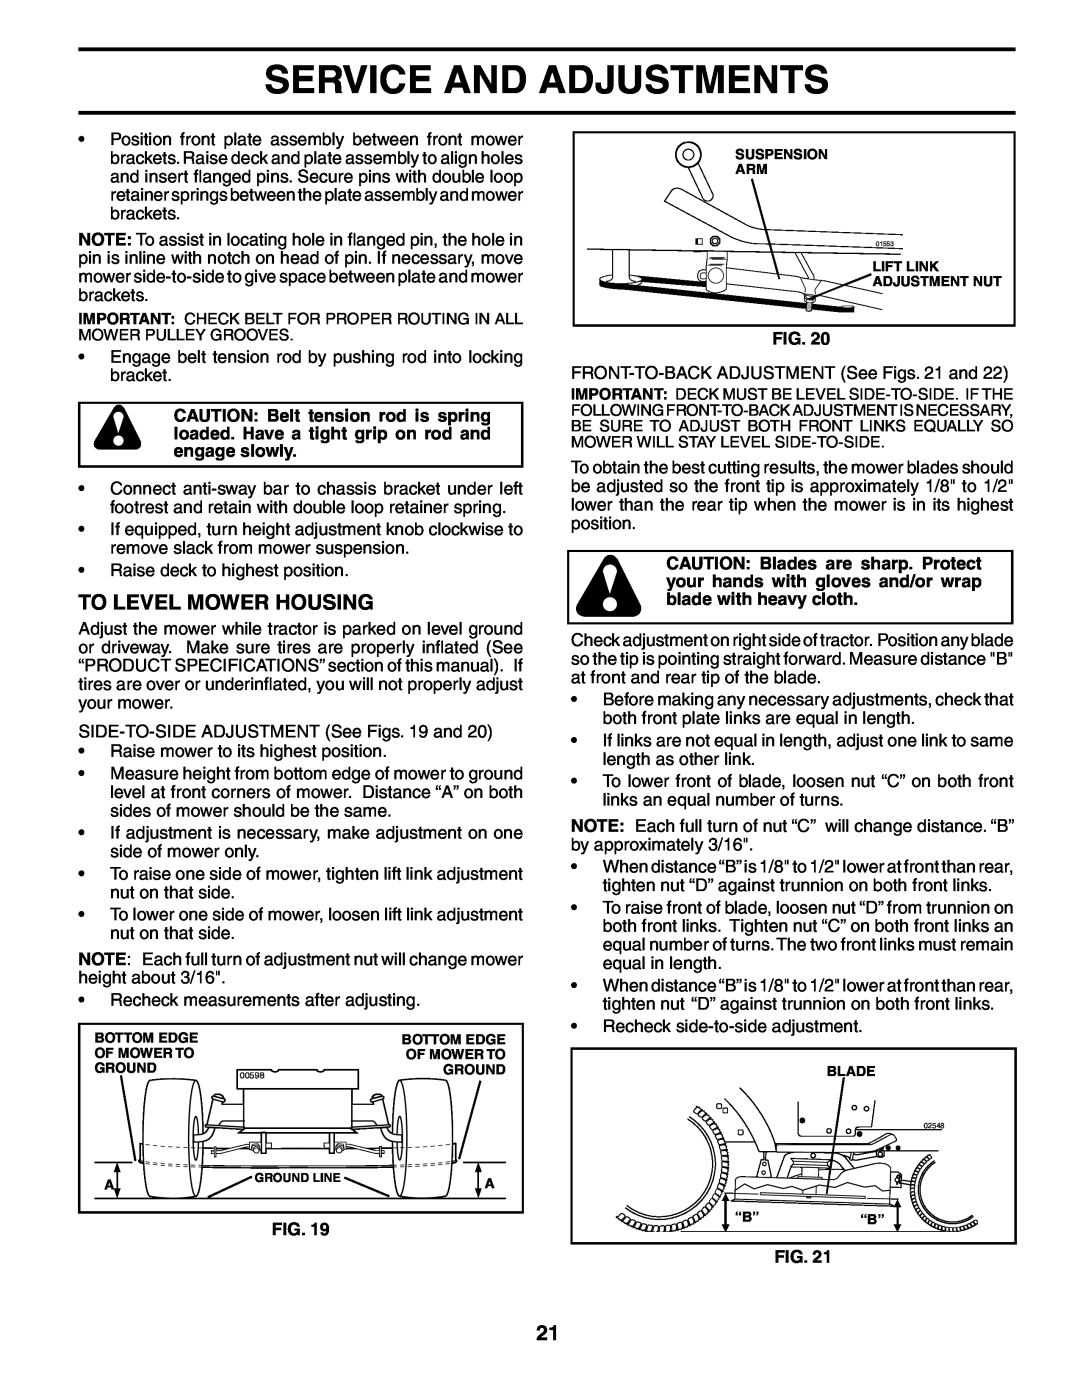 Poulan DB24H48YT manual To Level Mower Housing, Service And Adjustments, Ground Line 